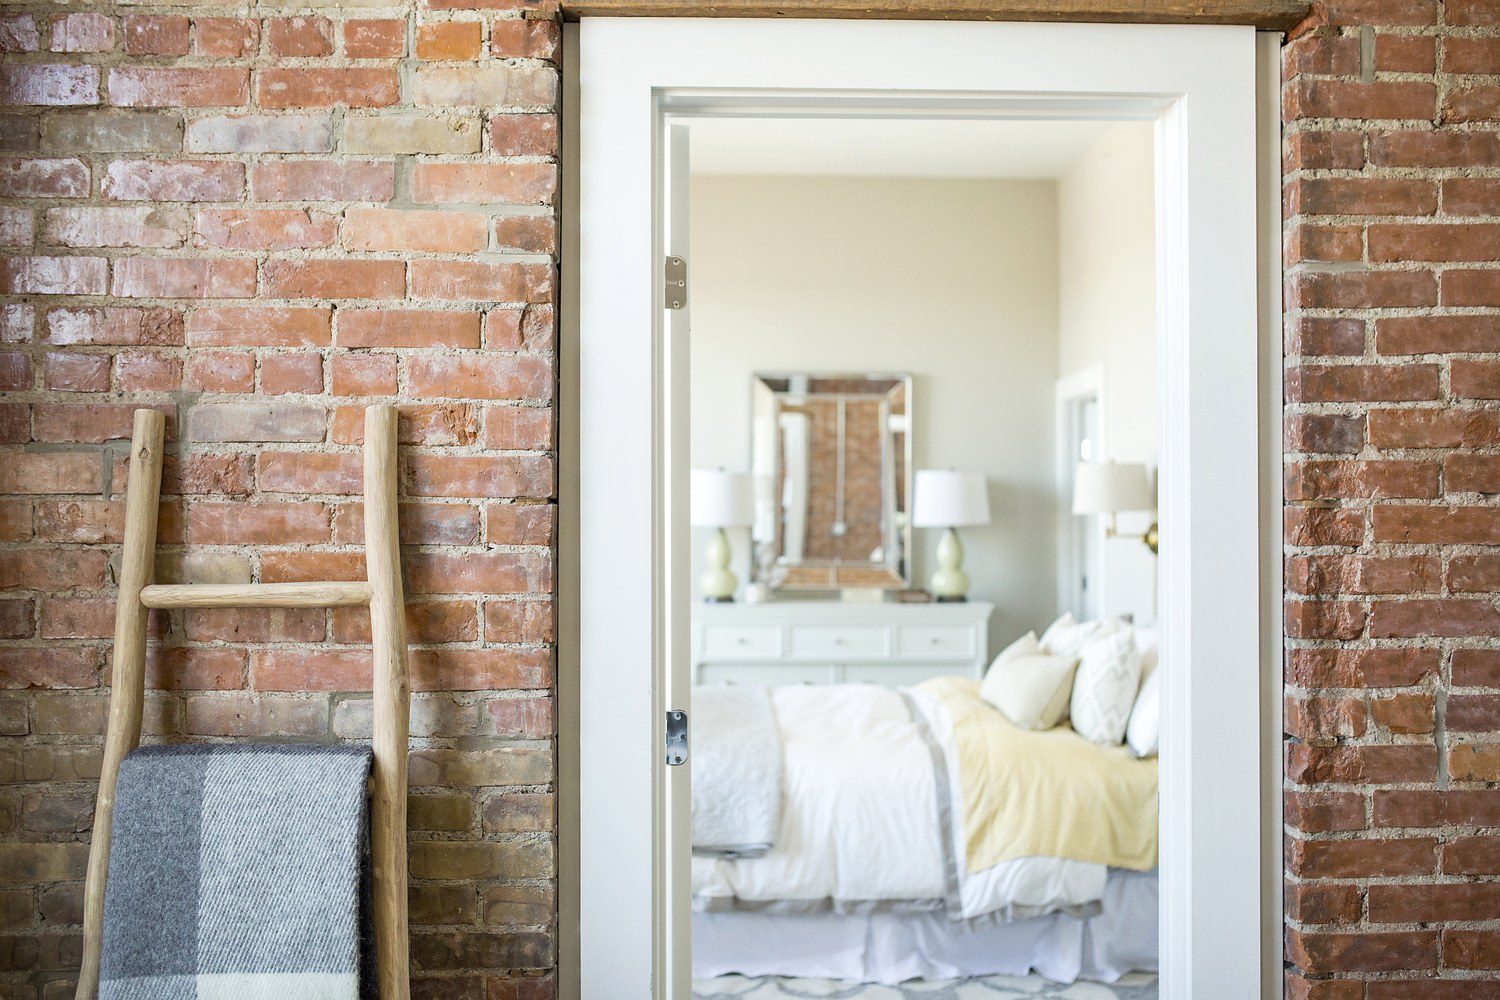 A bedroom with brick walls and white furniture.